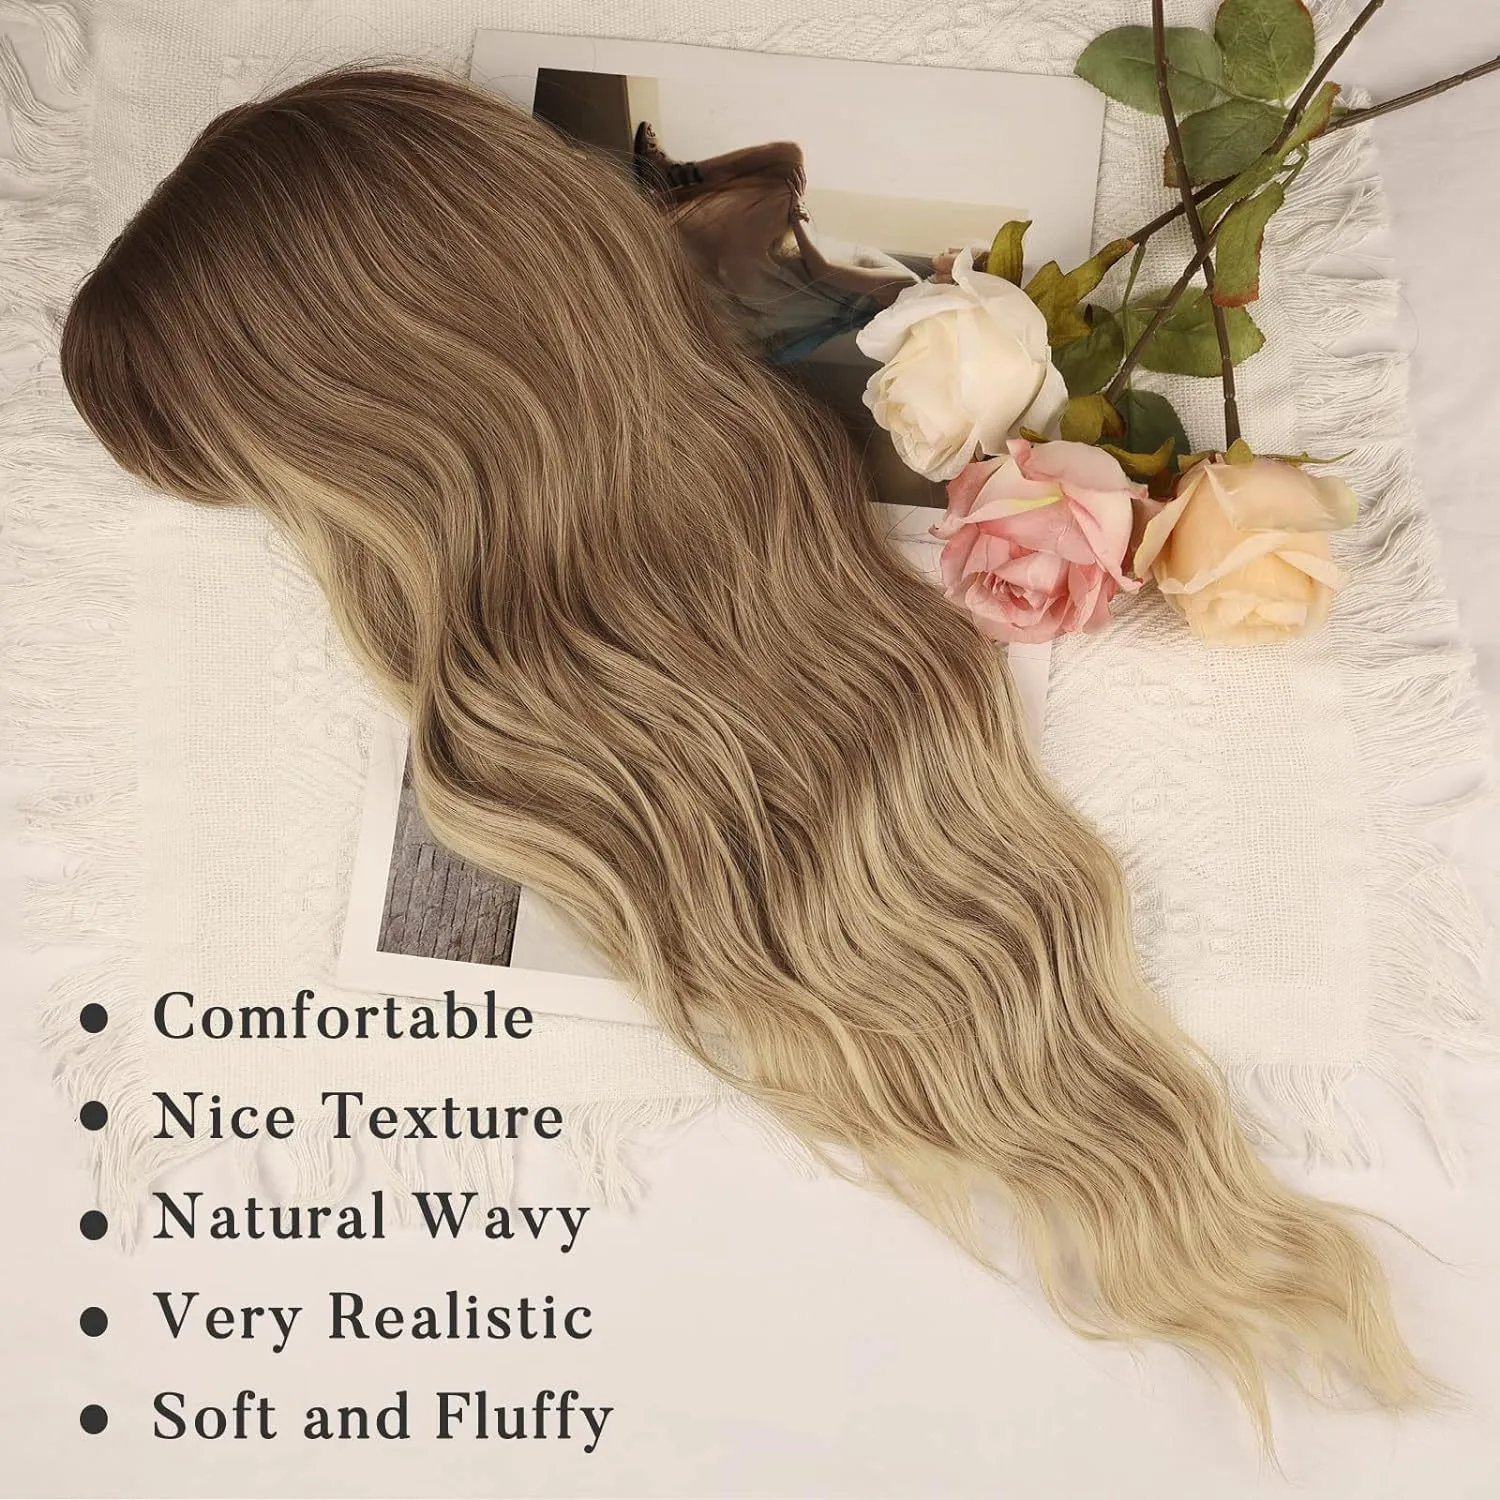 Long Deep Wave Full Lace Front Wigs Human Hair curly hair 16 styles wigs female lace wigs synthetic natural hair lace wigs free fast